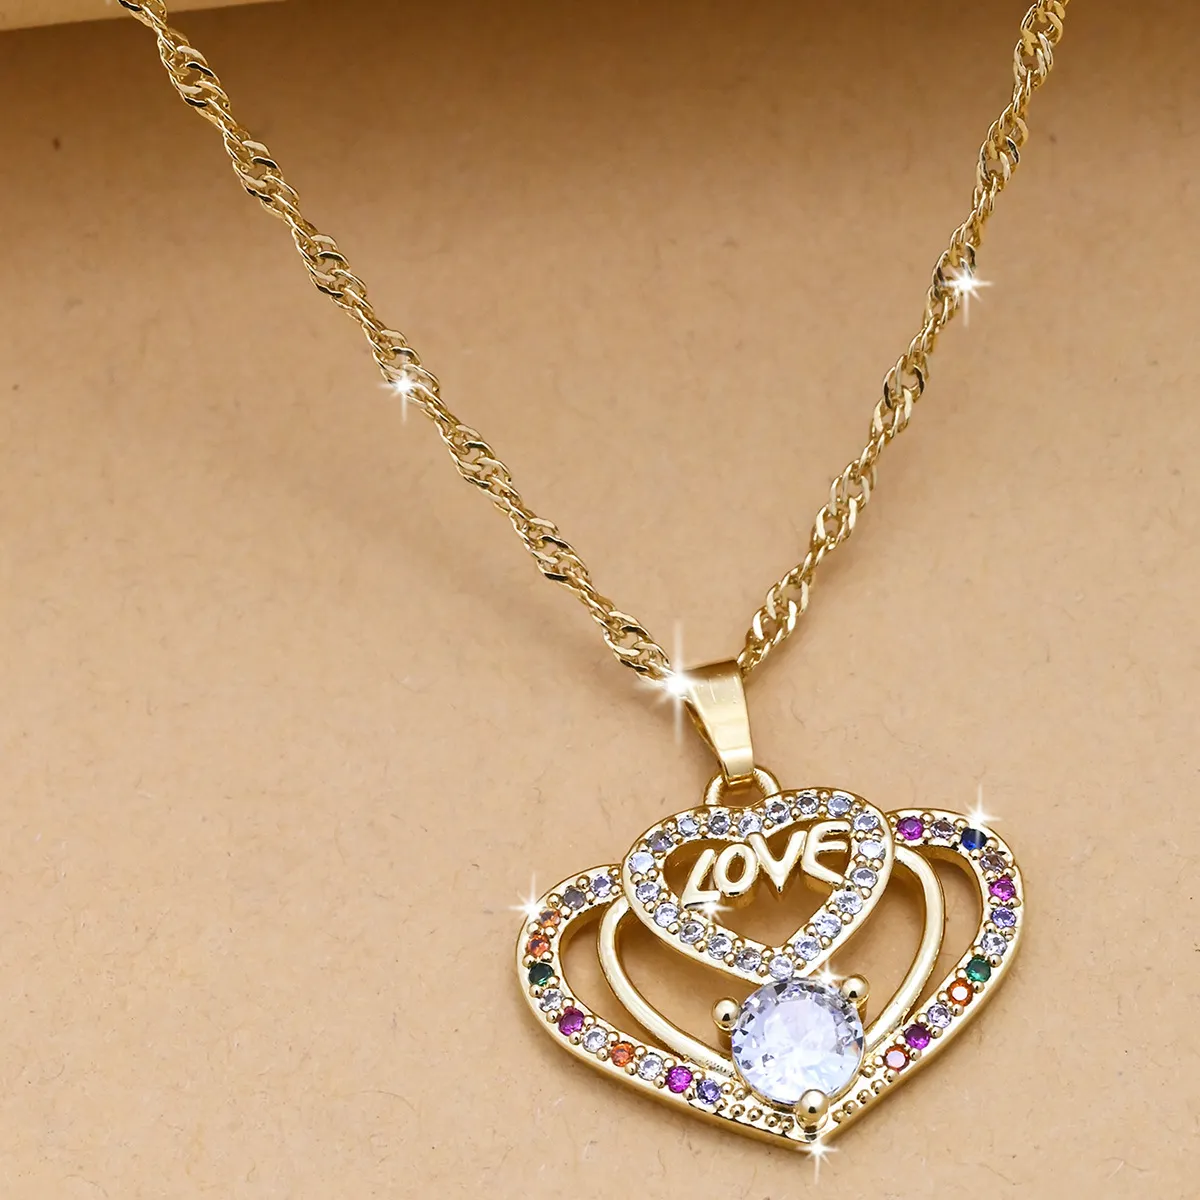 Pendant Necklaces Pendants Jewelry Diamond Peach Heart Mothers Day Gift Family Daughter Sister Crystal Necklace Drop Delivery 2021 Otpv5